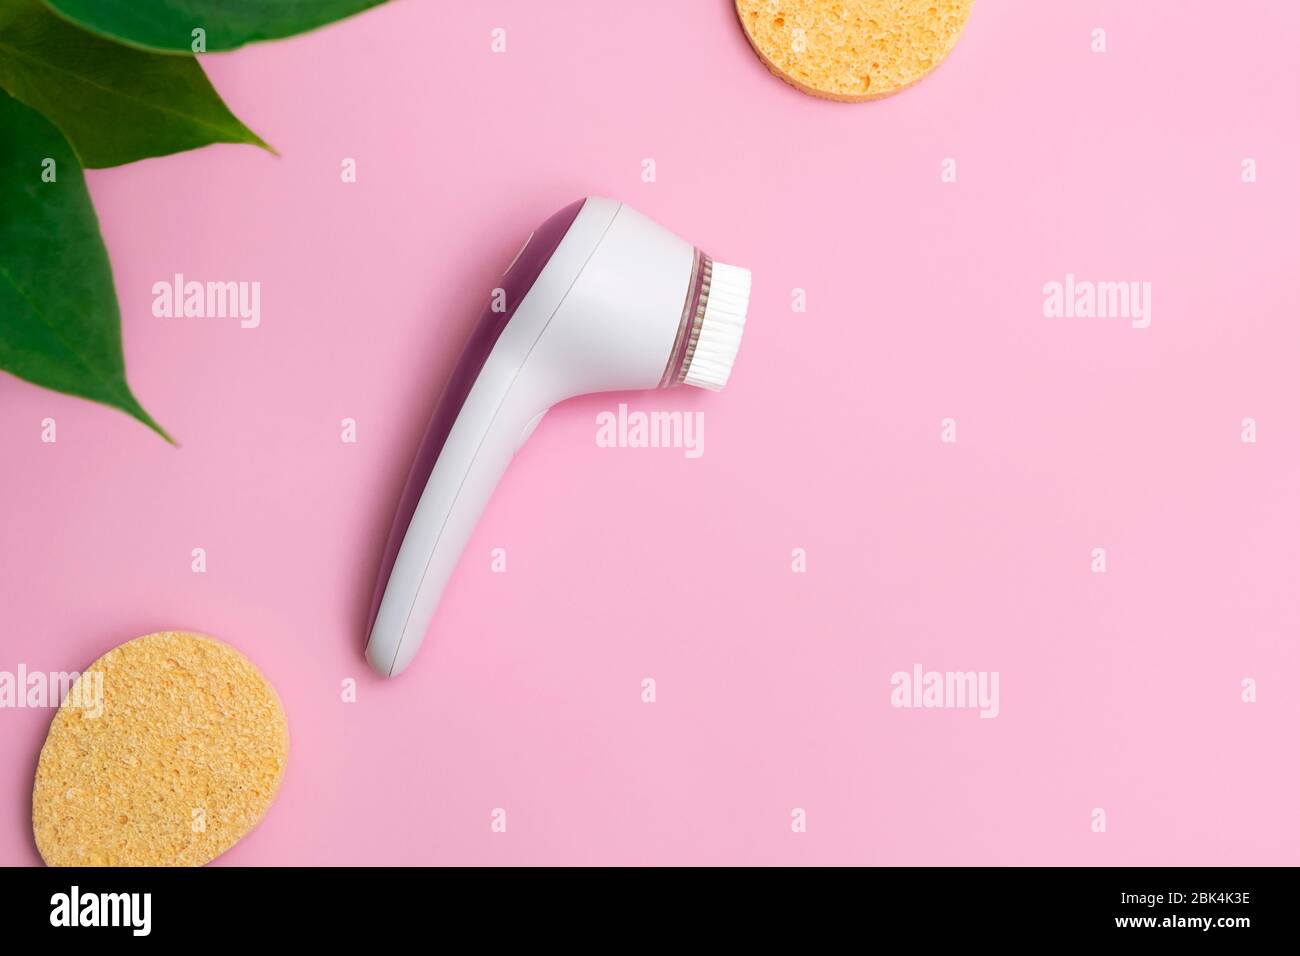 Facial cleansing brush with face sponges on soft pink background. Top view with copy space Stock Photo